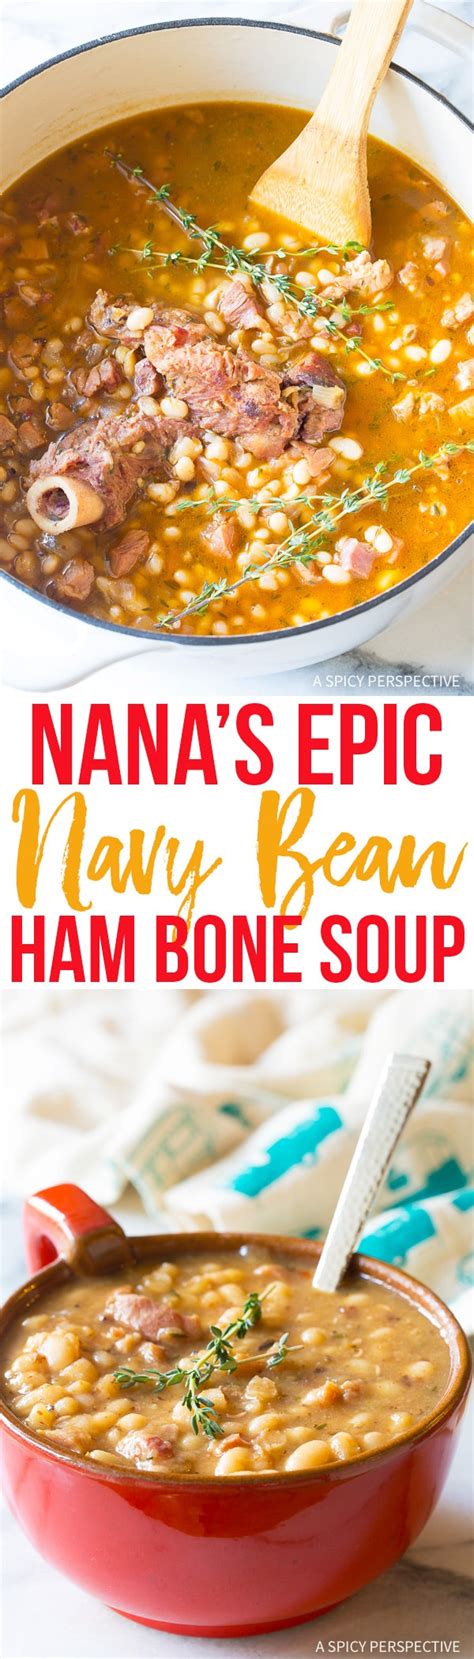 Adjust cooking time if needed until beans are soft and tender. Nana's Epic Navy Bean Ham Bone Soup - A Spicy Perspective